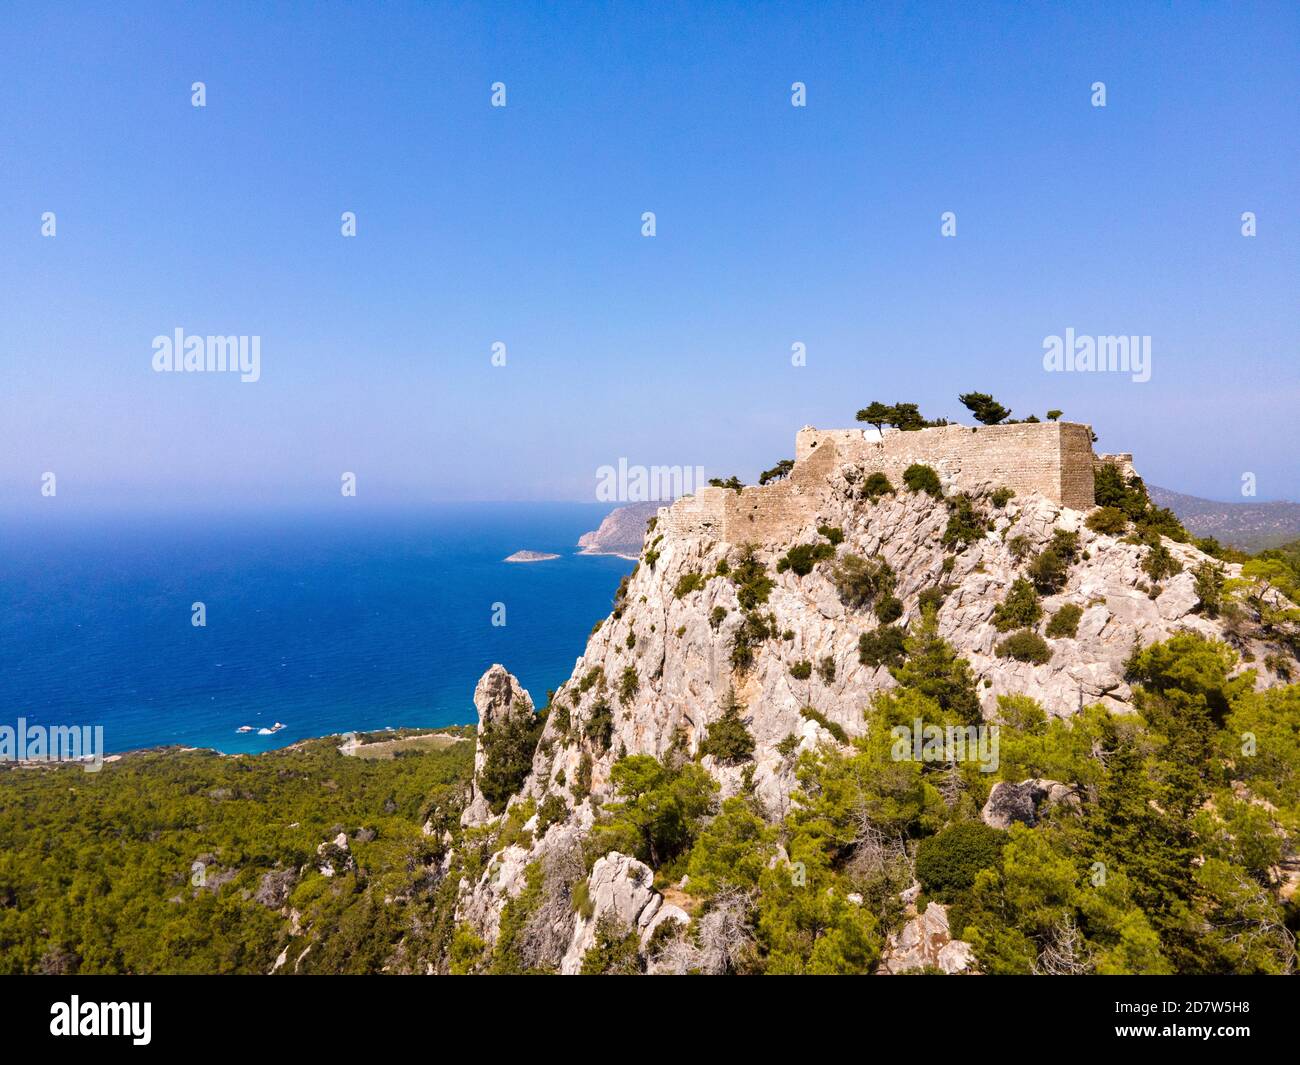 Elevated view of the ruins and remains of Monolithos castle in Rhodes, Greece Stock Photo